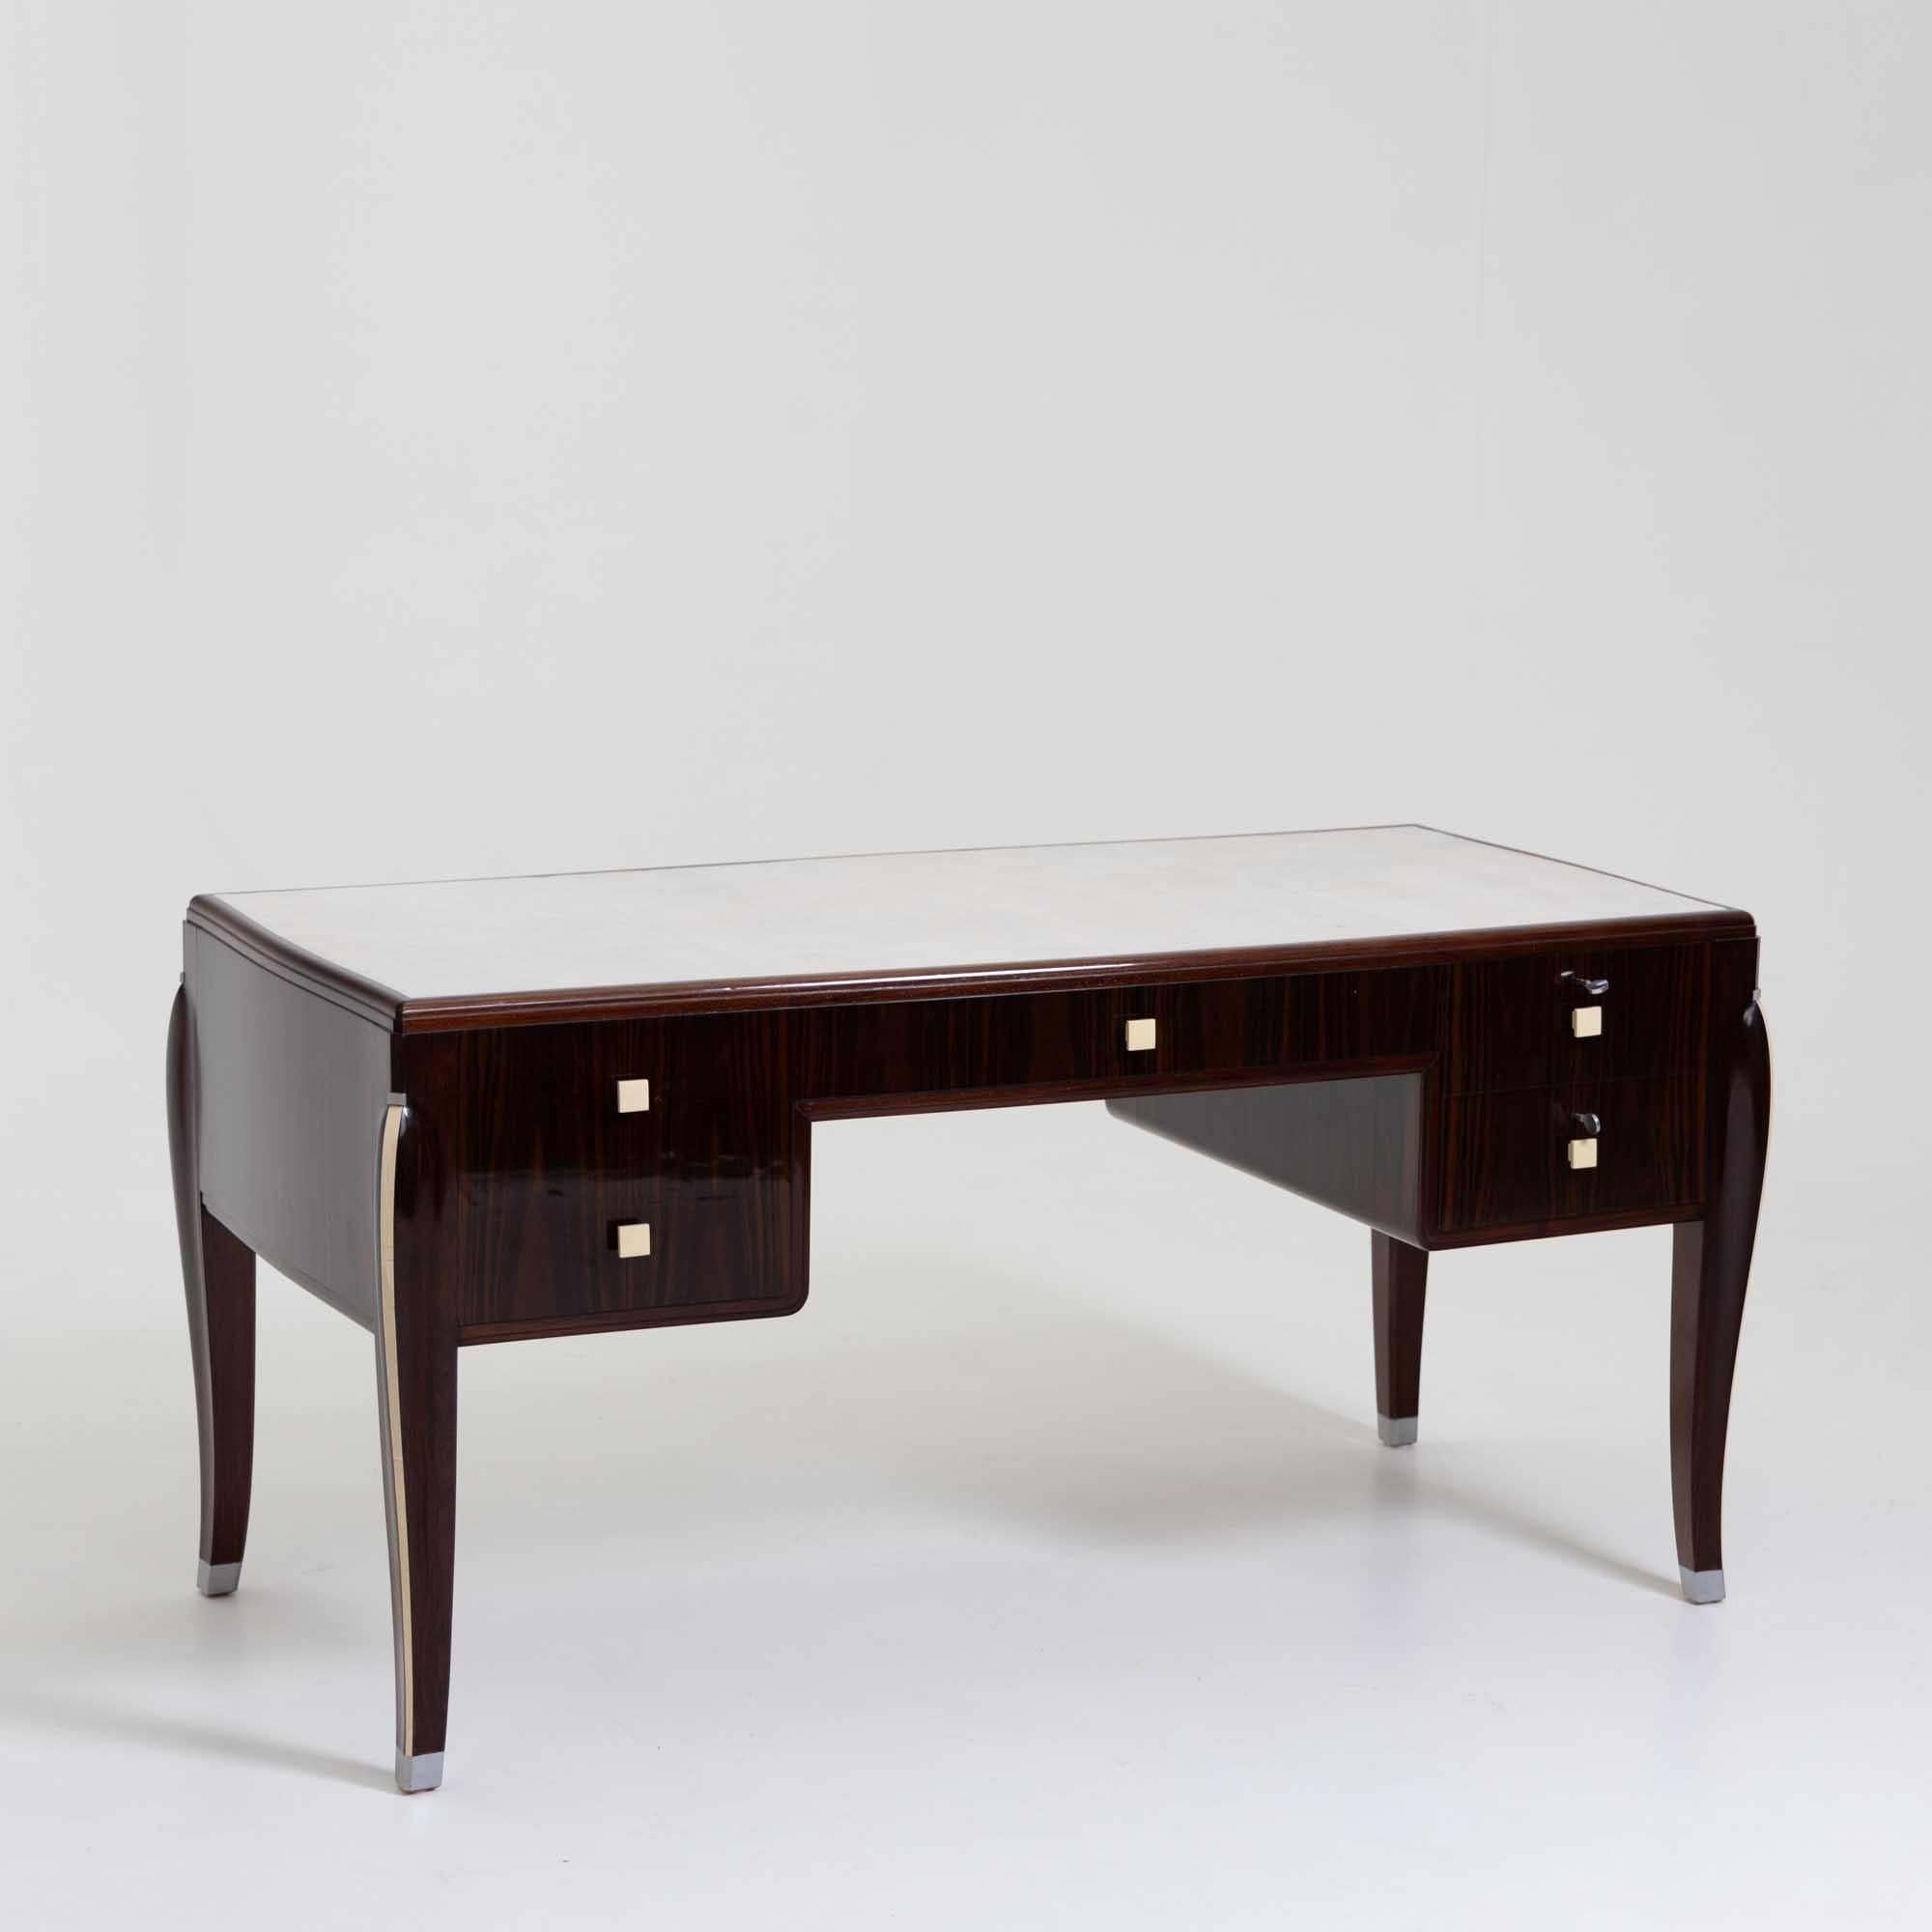 Art Deco Desk in the style of Jacques-Emile Ruhlmann (1879-1933), France, 1920s For Sale 7